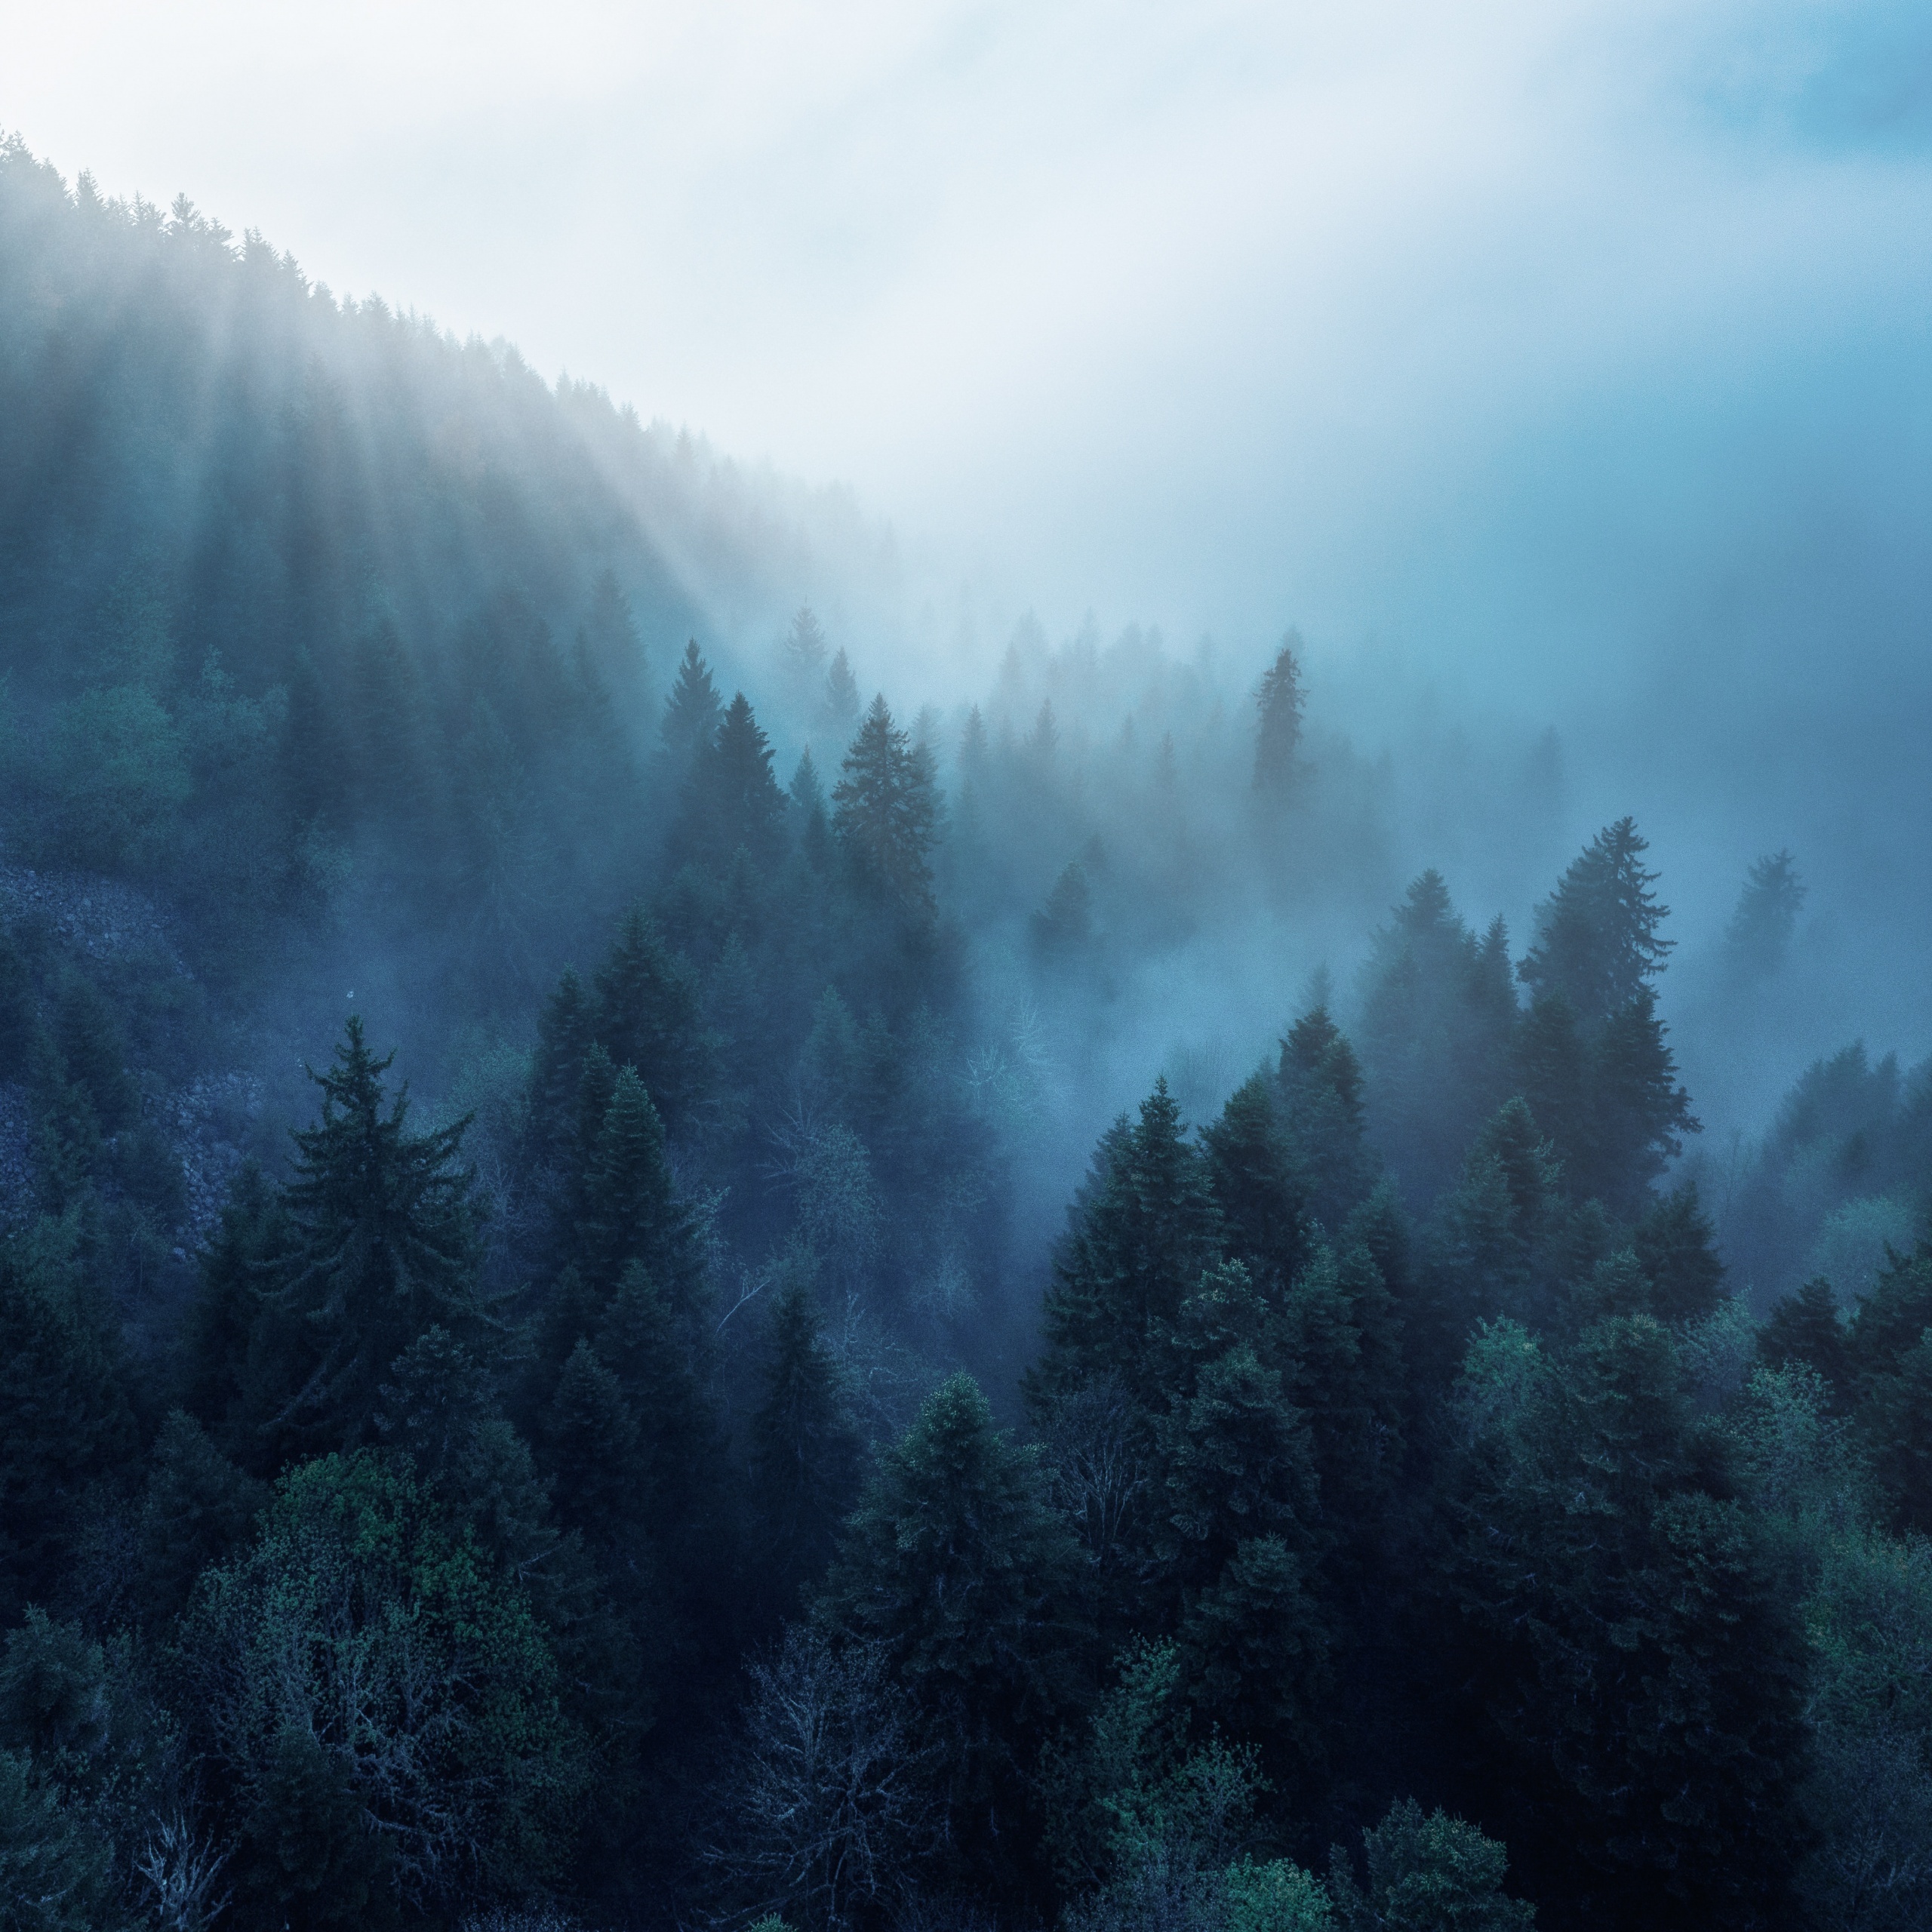 https://4kwallpapers.com/images/wallpapers/forest-rhone-alpes-sunlight-morning-fog-blue-ambiance-2560x2560-1095.jpg